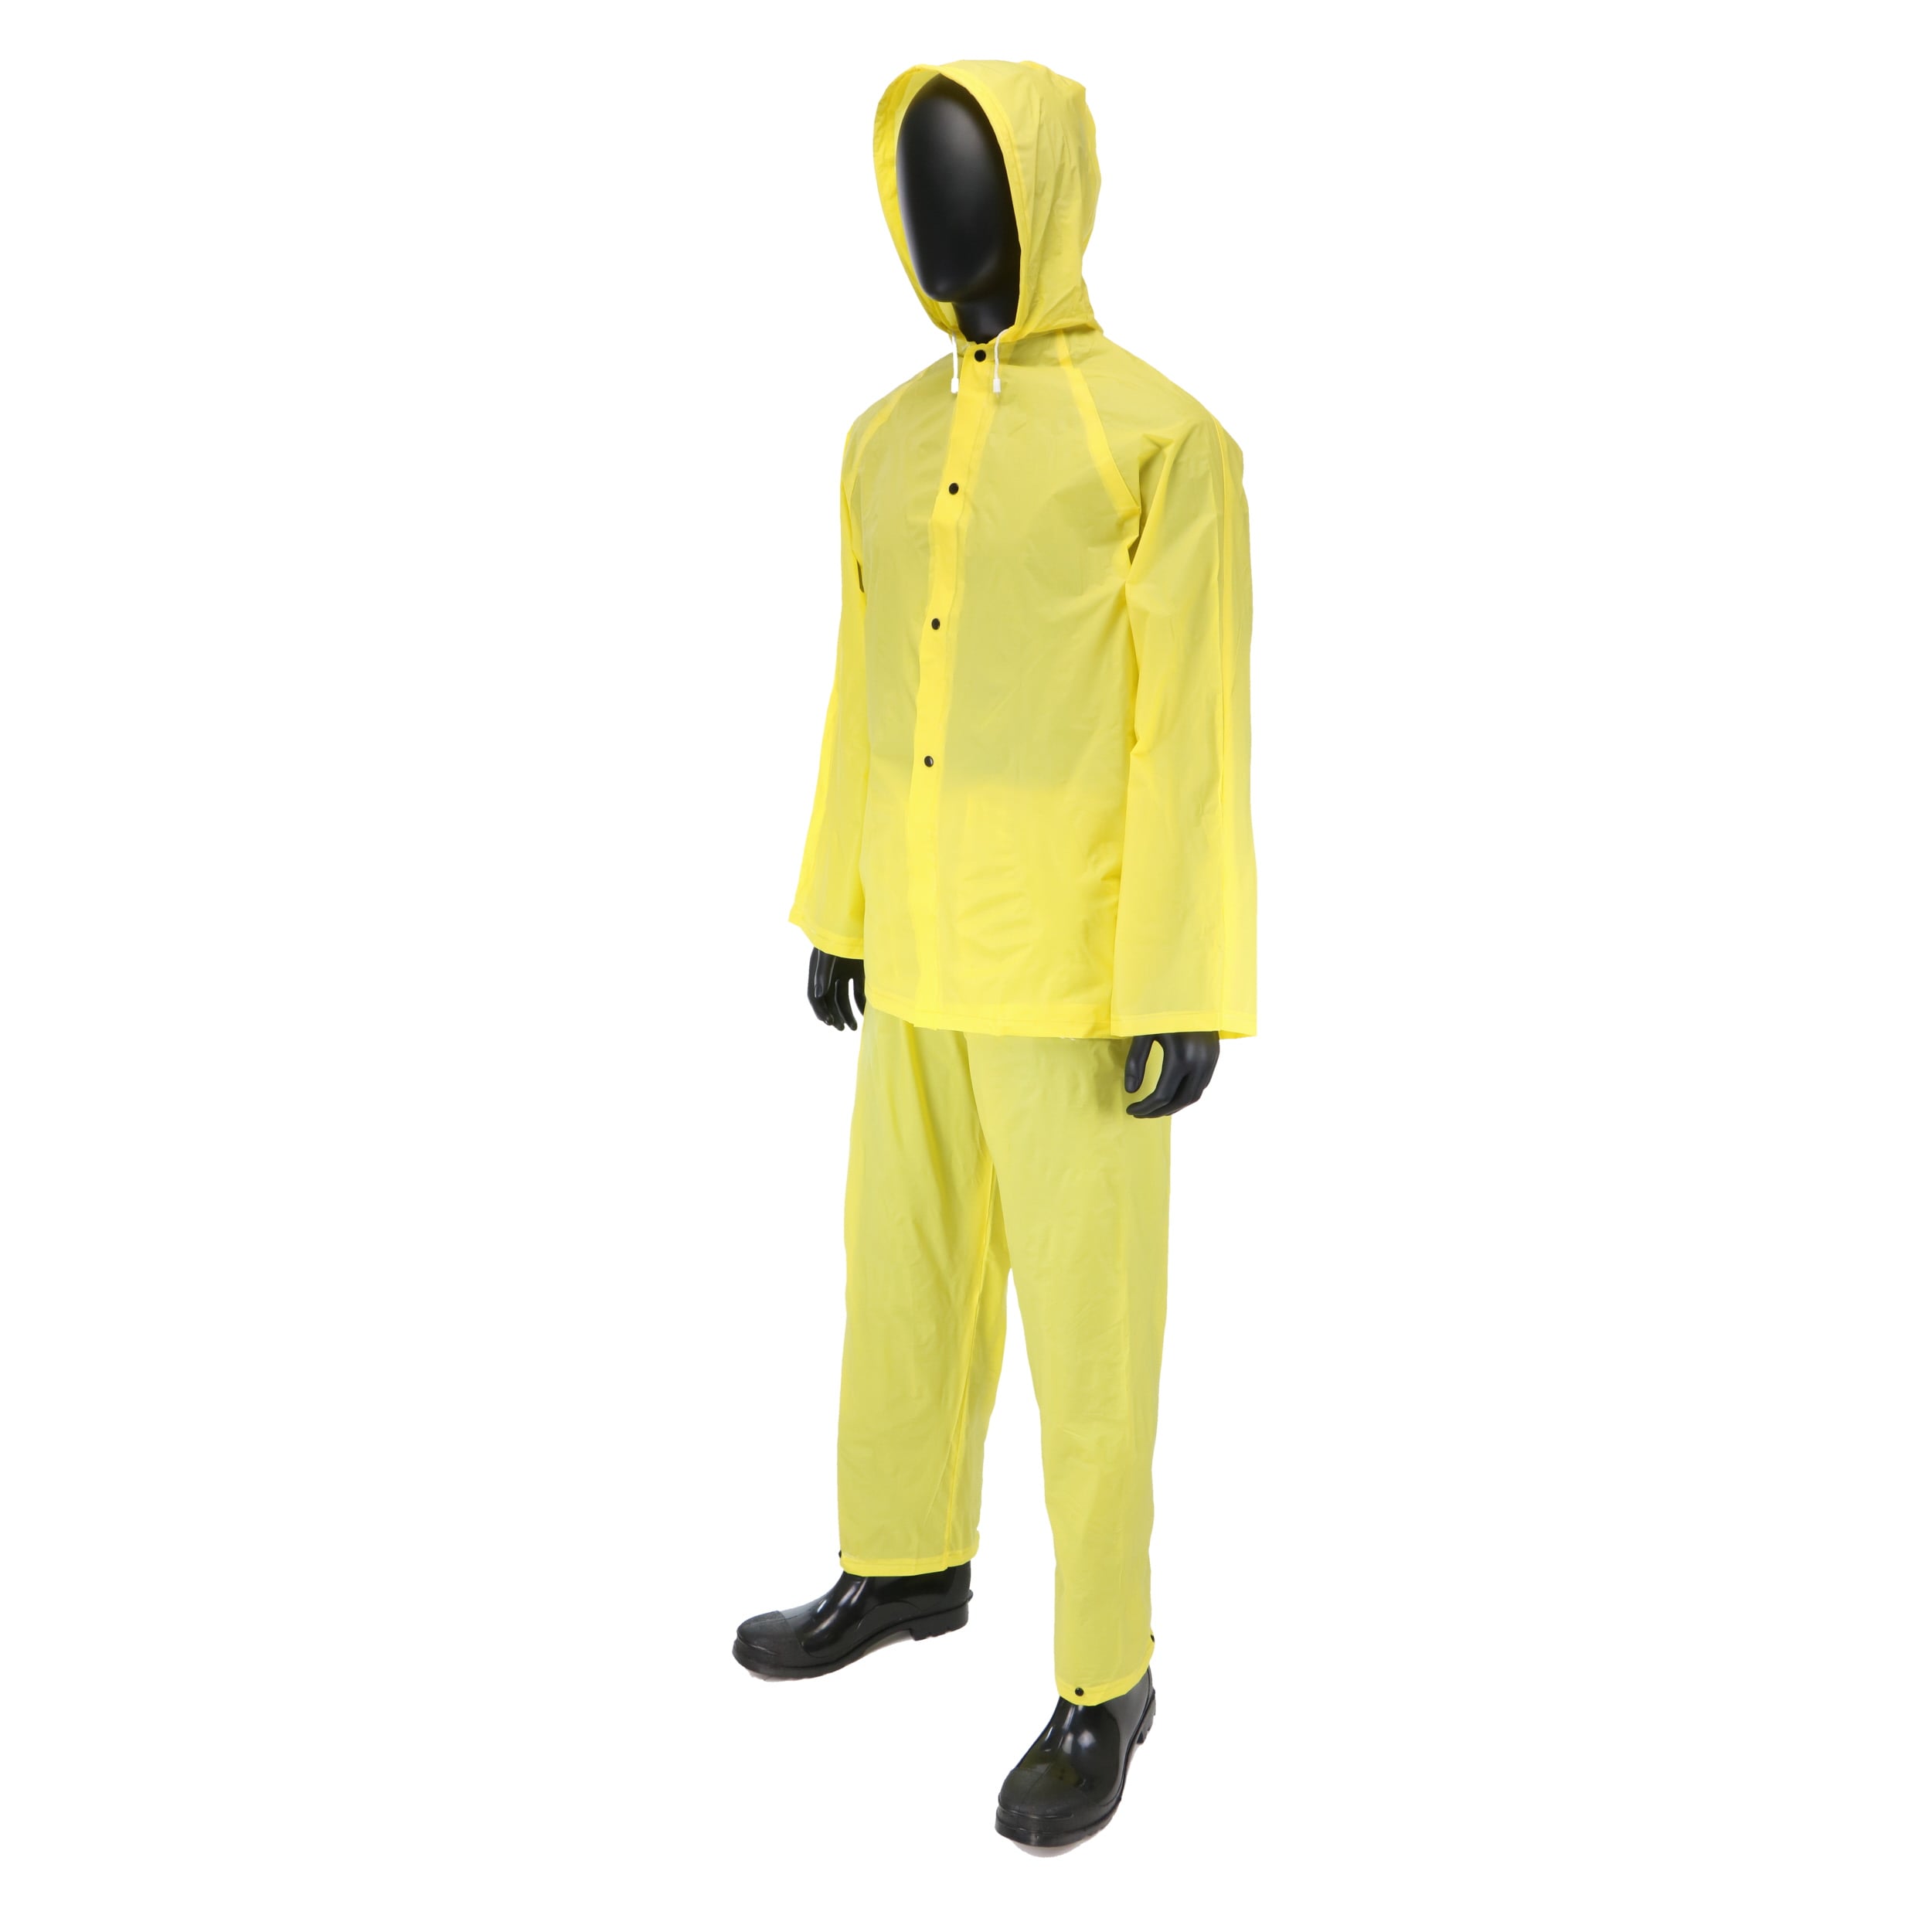 Waterproof PVC 2-Piece rain Suit Rain Suit Yellow 2pce XX-Large 79-138cm Underarm Vents 31-54 Zipped Front with Studded overlaps Twin Jacket Pockets Durable Includes Hood with Neck Cord 